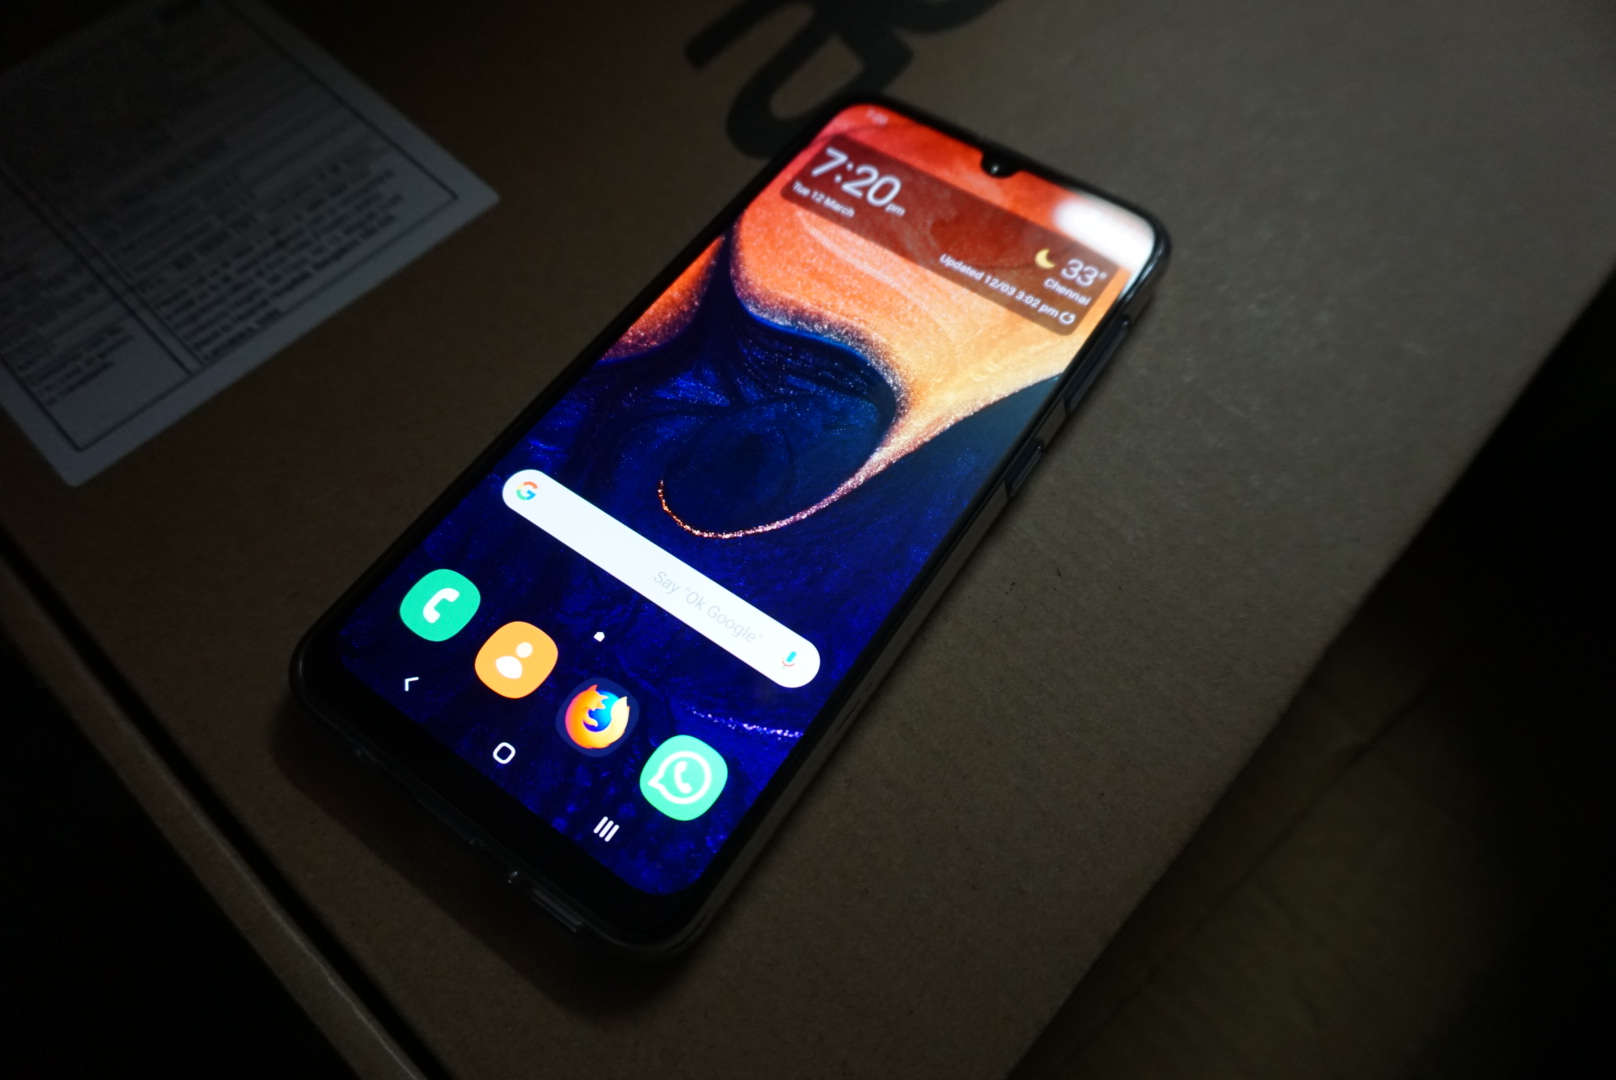 [Updated] Samsung Galaxy A50 Android 10/One UI 2.0 update along with March security patch goes live